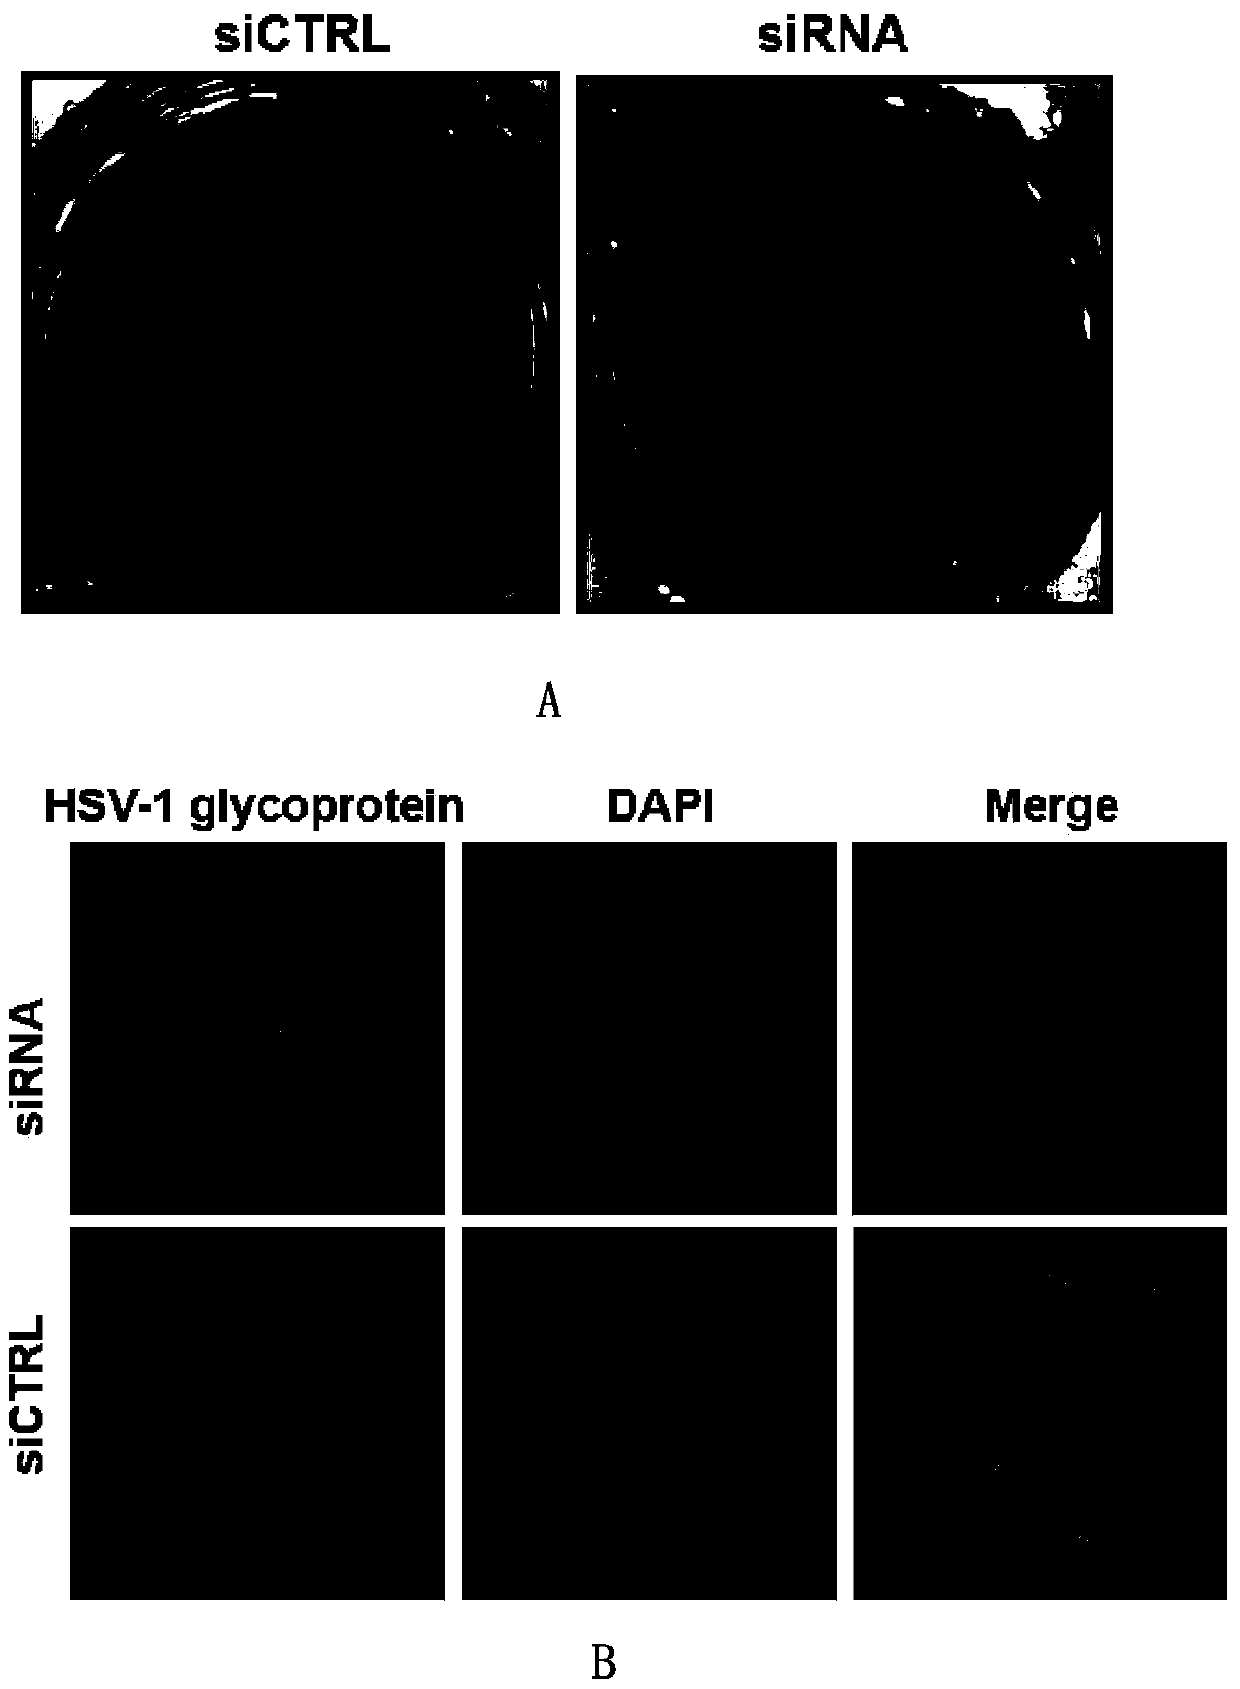 Application of antiviral double-stranded RNA and its temperature-sensitive gel preparation in the treatment and prevention of diseases caused by hsv-1